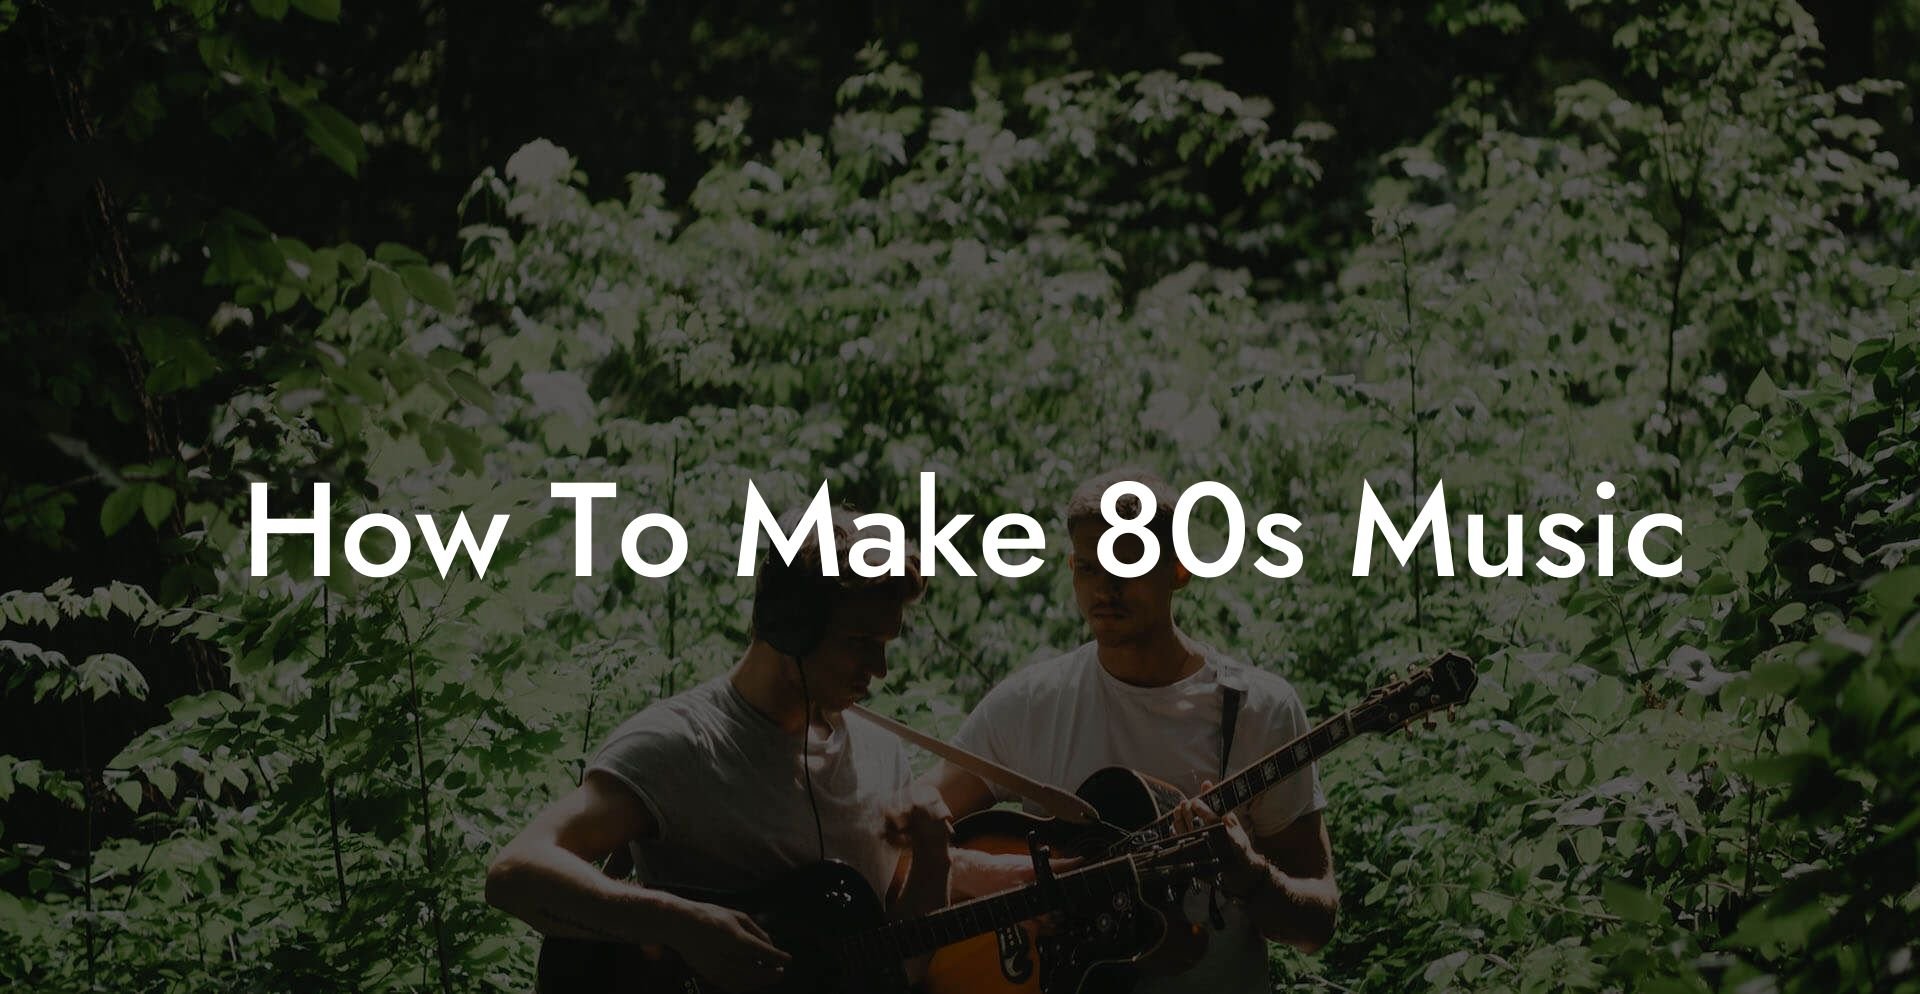 how to make 80s music lyric assistant